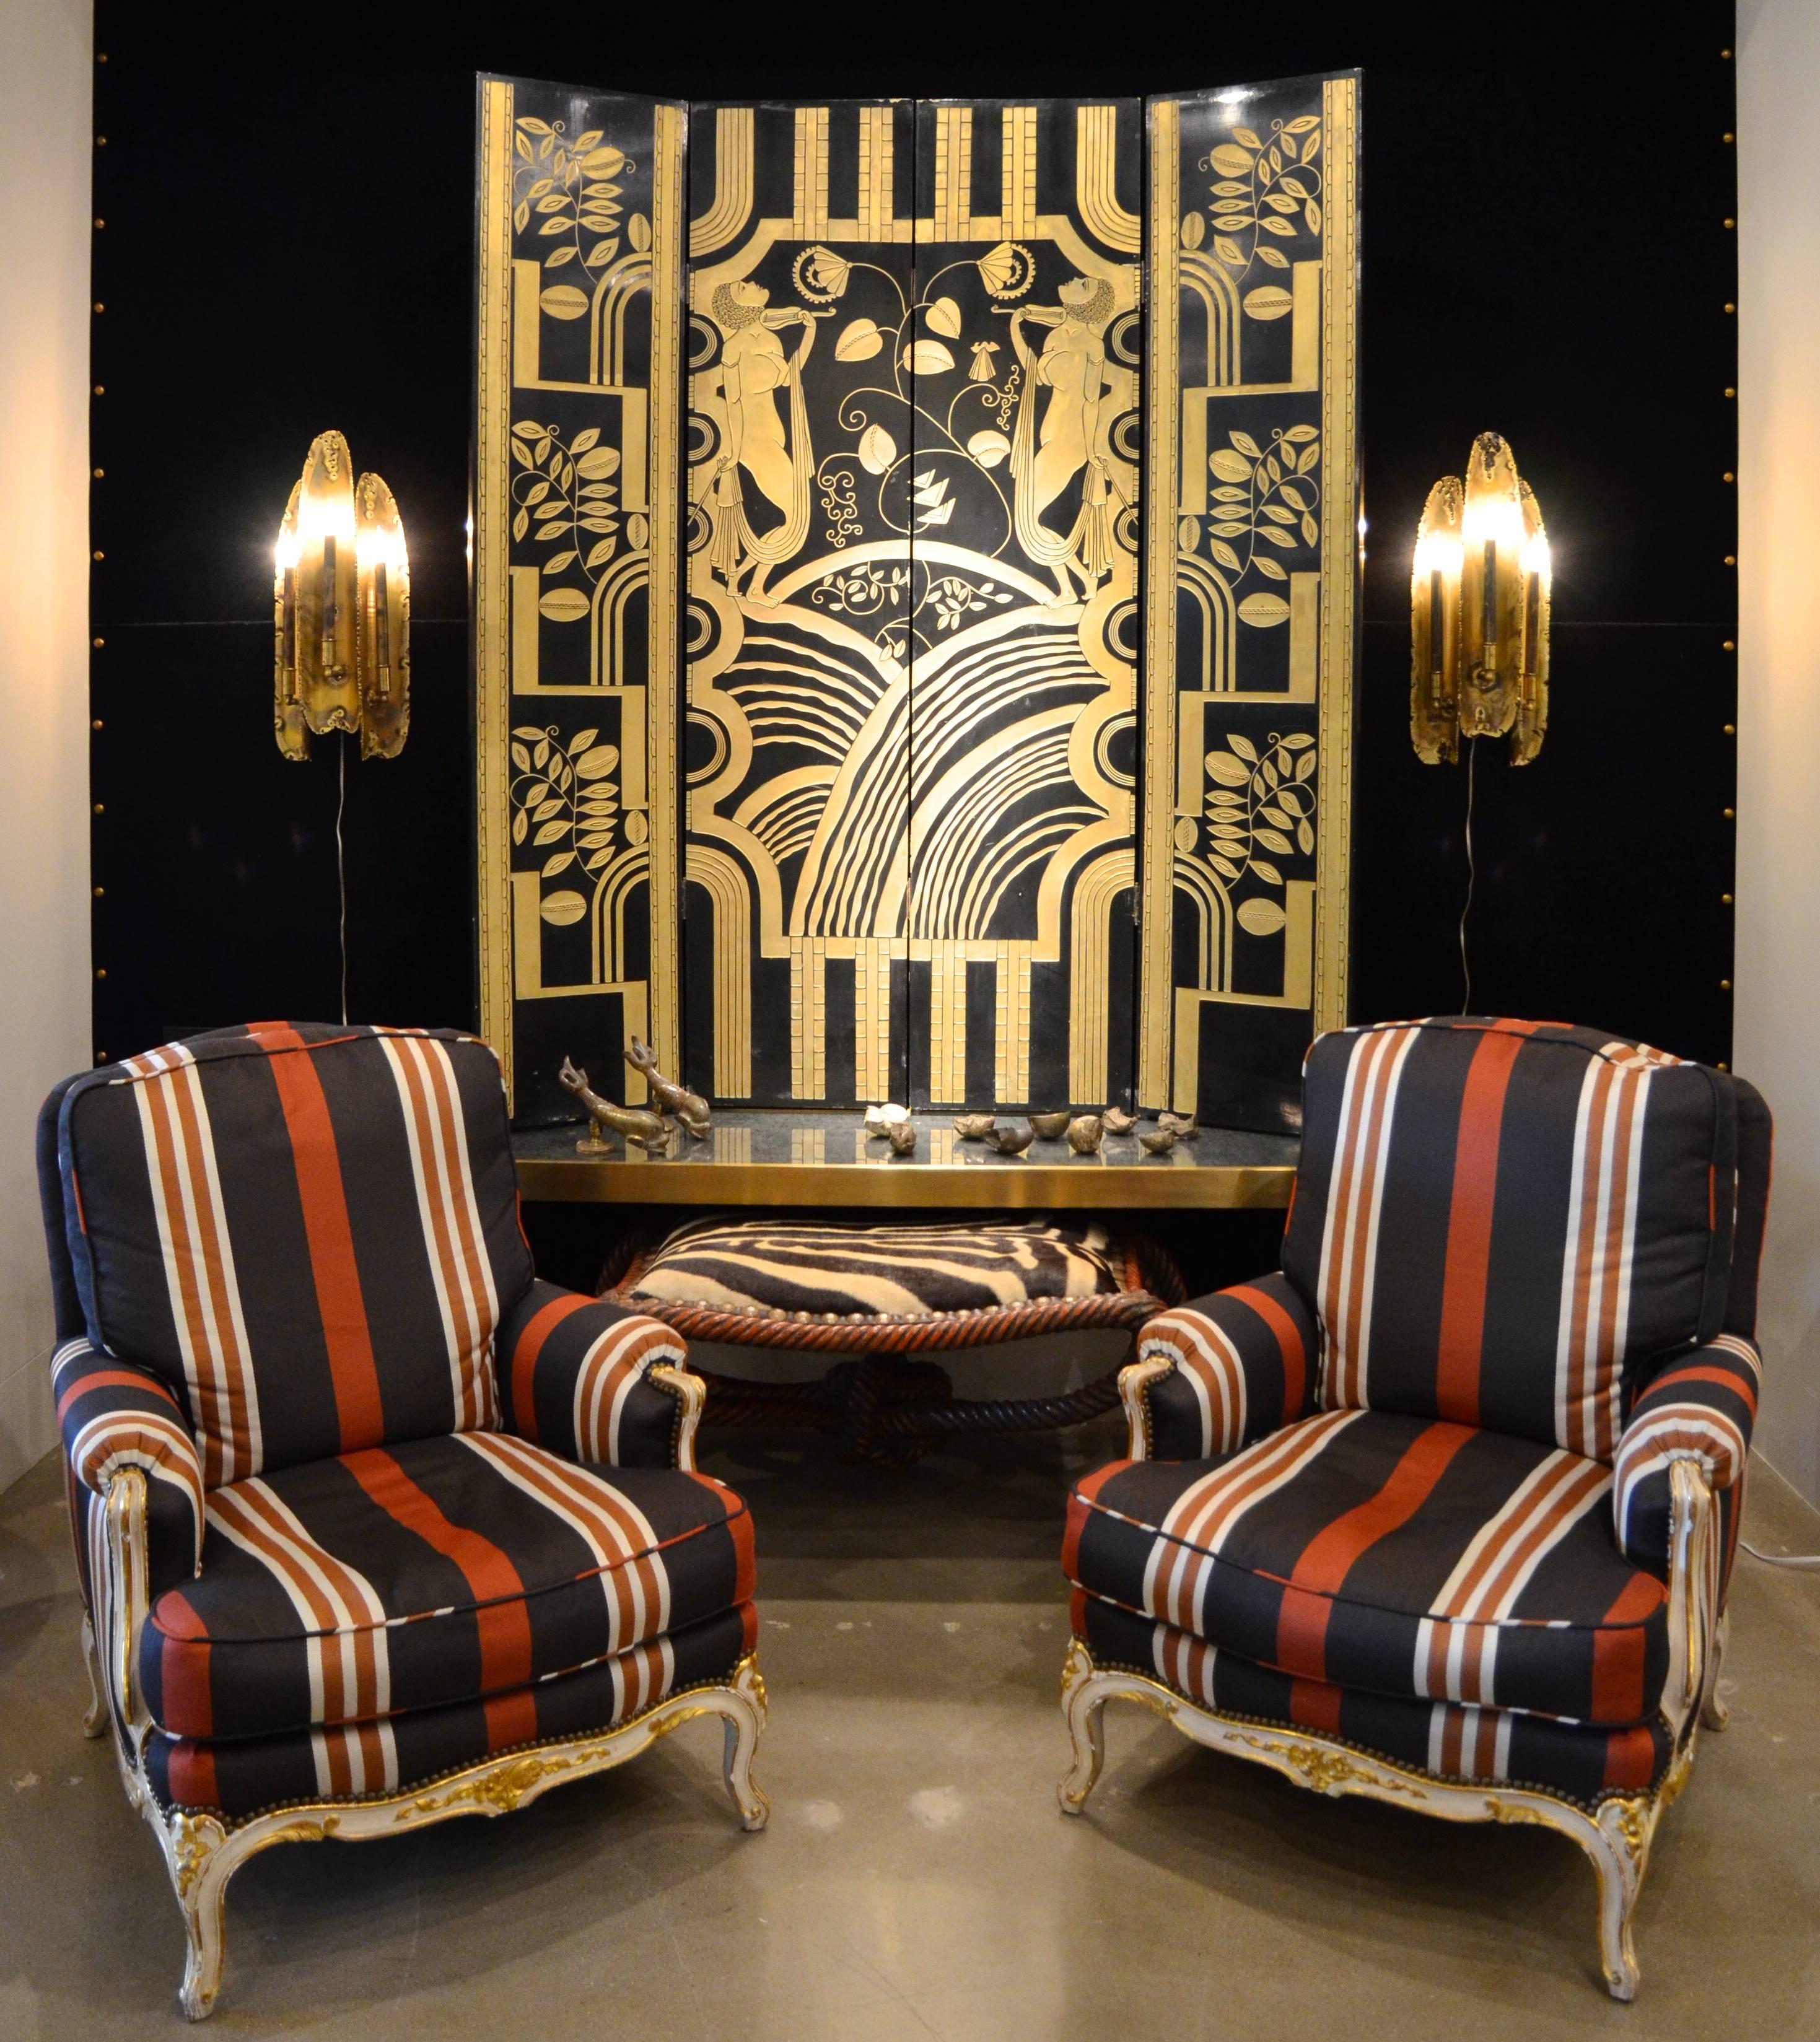 A stunning Art Deco four-fold screen of black lacquer and gold paint with bas relief Art Nouveau inspired imagery.  Reference a Fehér (attr.) screen sold at Sotheby's London in 2010 for $12,500 GBT (converted to appx. $19,500 in US dollars/2010). 